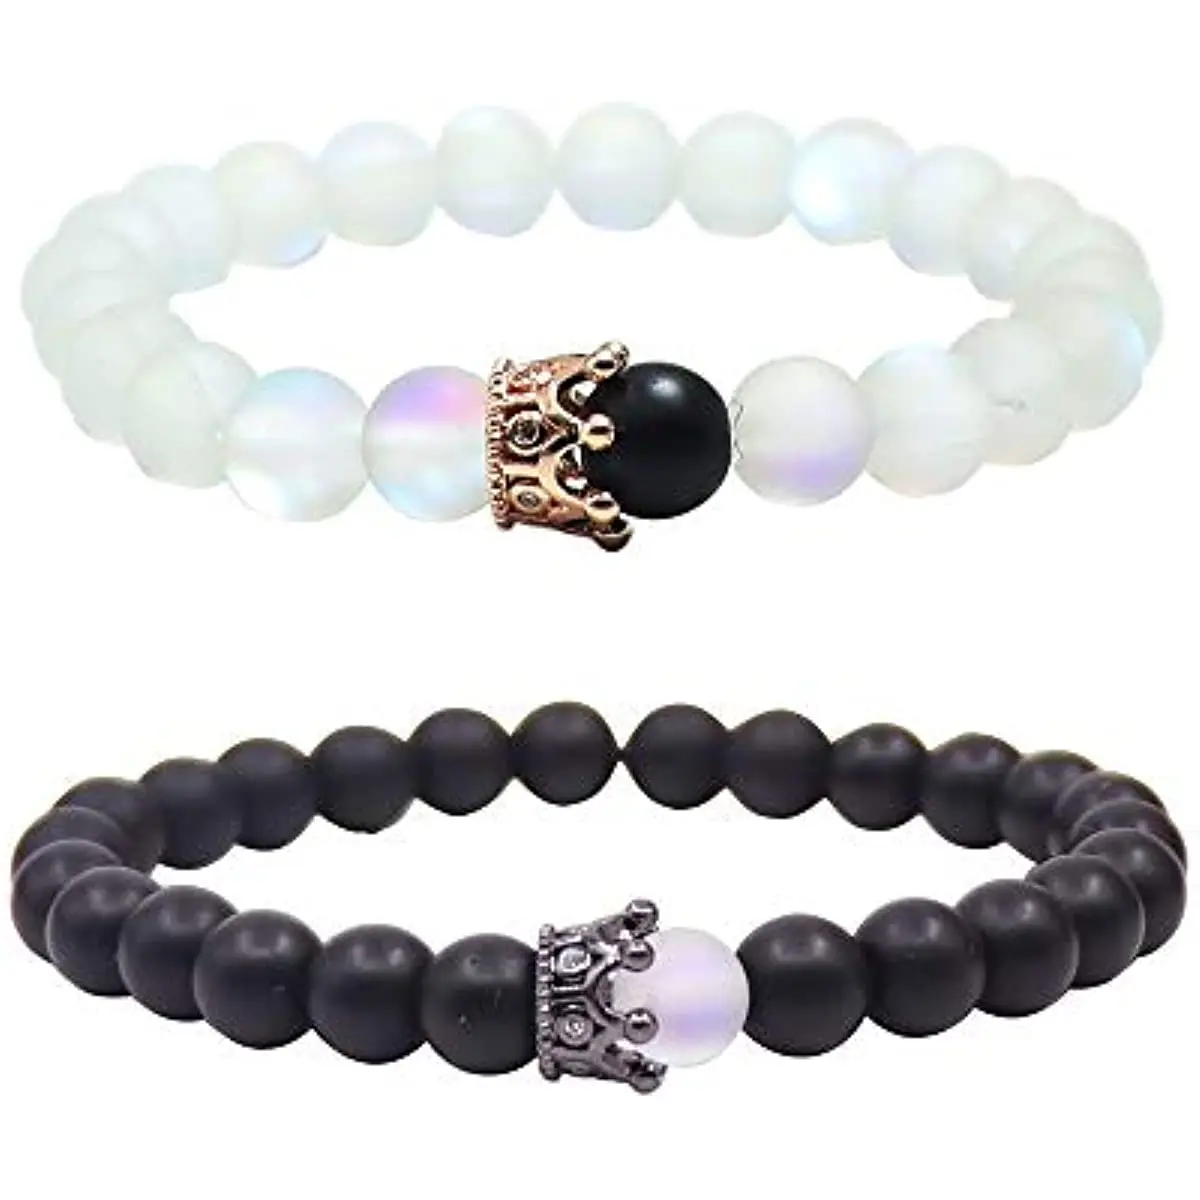 

King&Queen Crown Distance Couple Bracelets His and Her Friendship 8mm Beads Bracelet